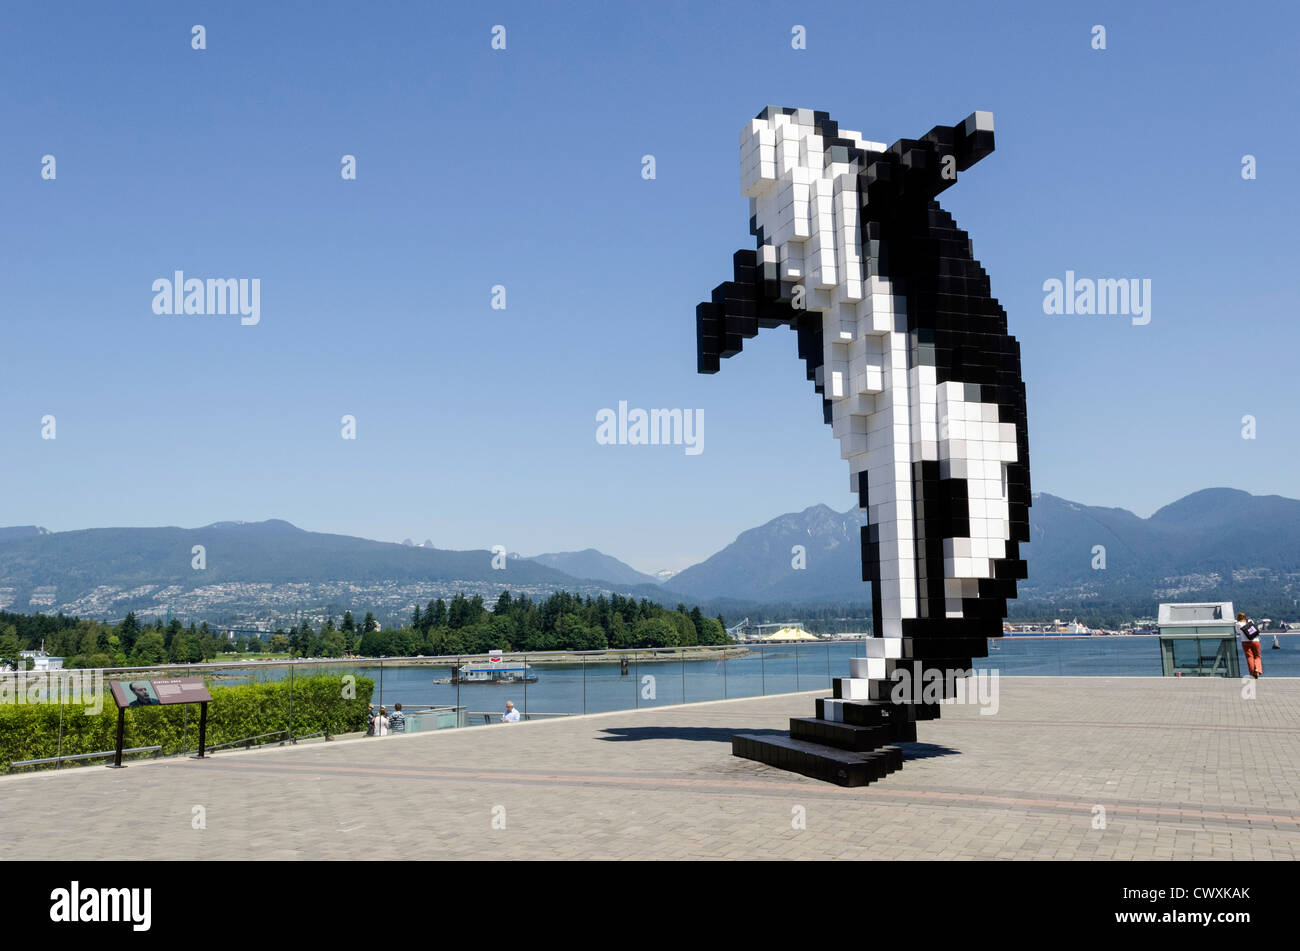 Digital Orca modern art sculpture in Vancouver, Canada - on the city waterfront Stock Photo